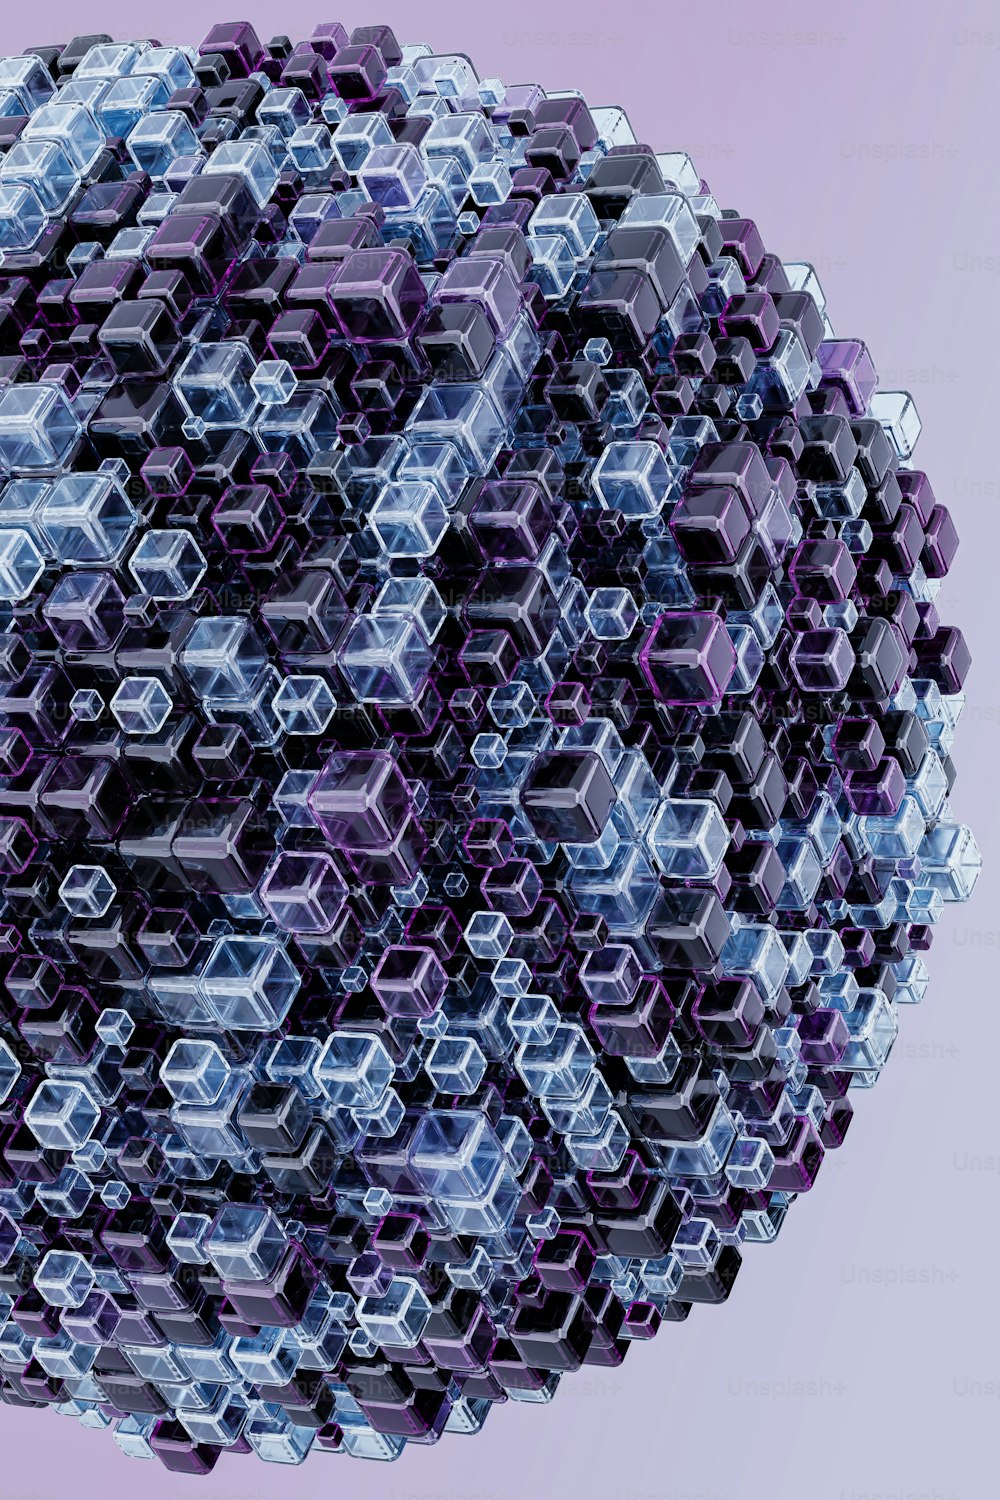 a sphere made of hexagonal cubes on a purple background